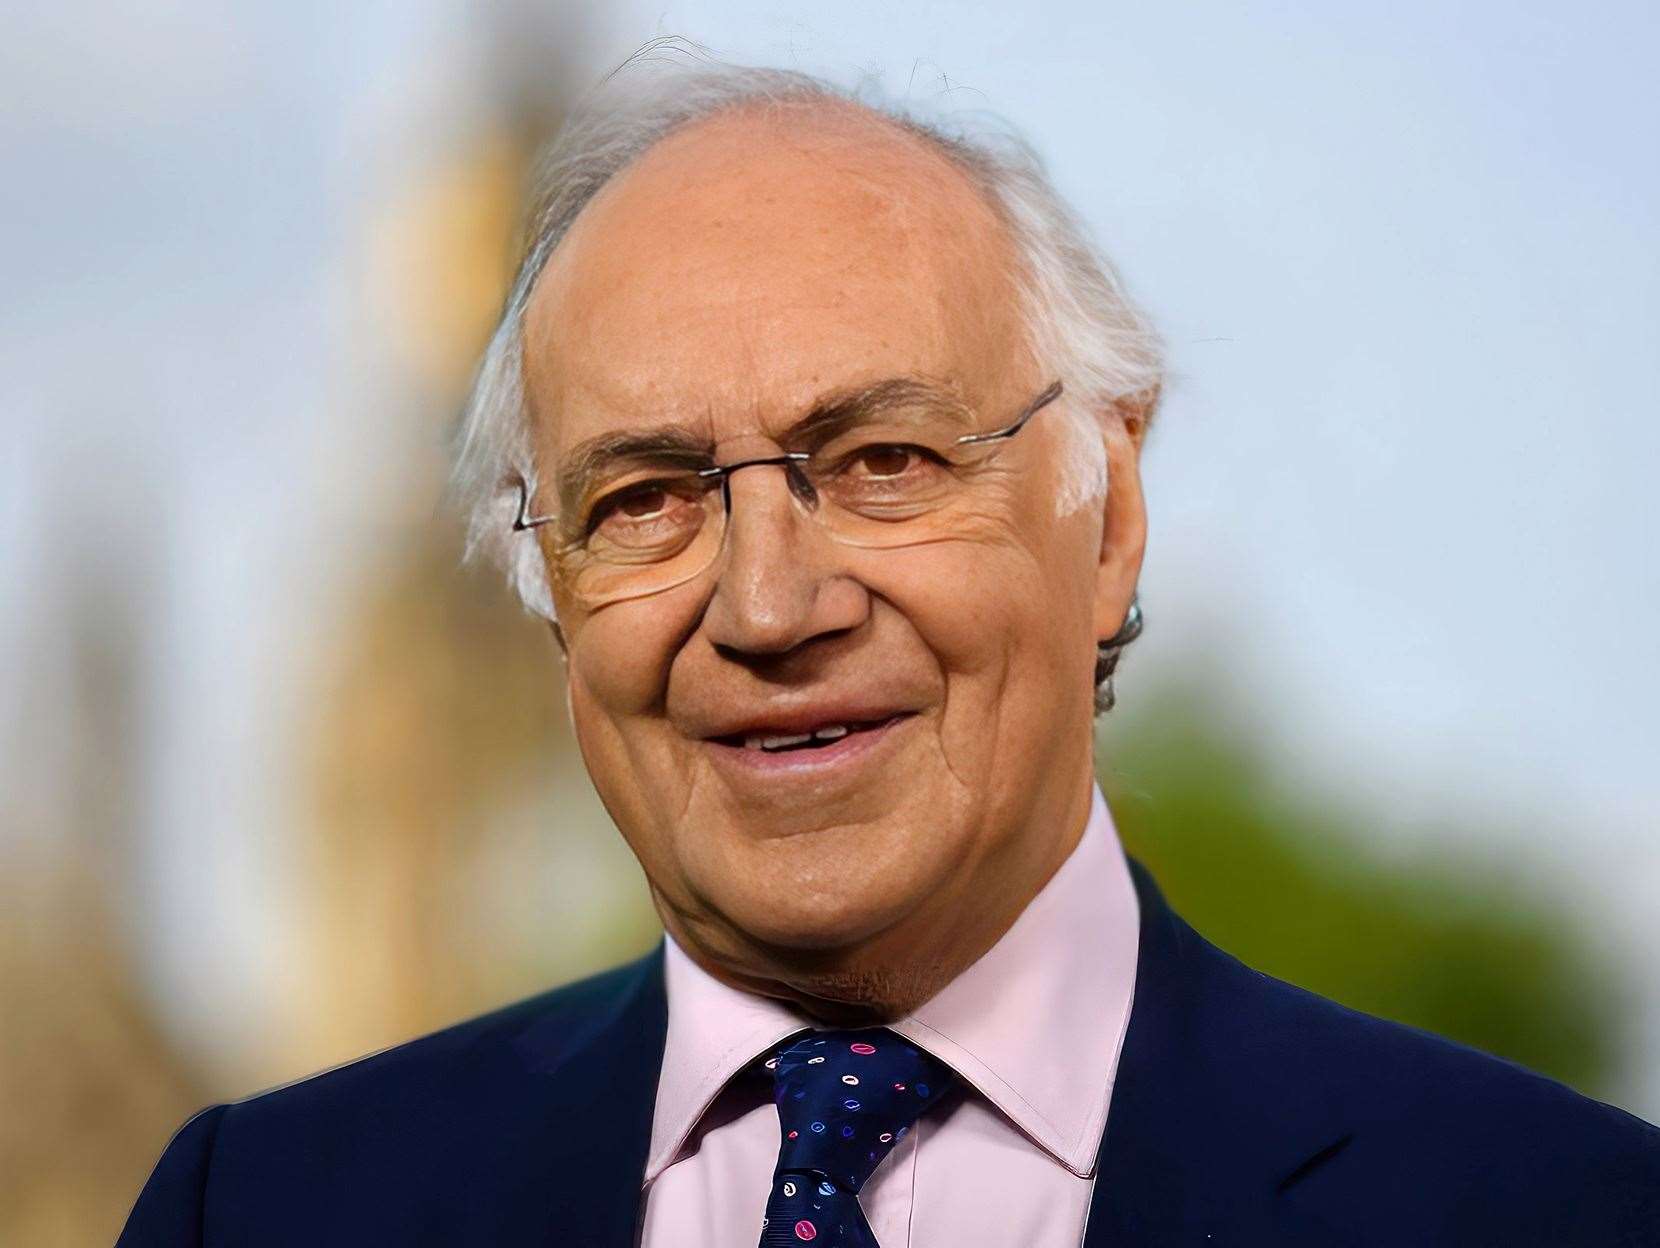 Michael Howard lives near the proposed site of the solar farm in Lympne, near Hythe, and says he does not think this is the right location for it. Picture: Michael Howard